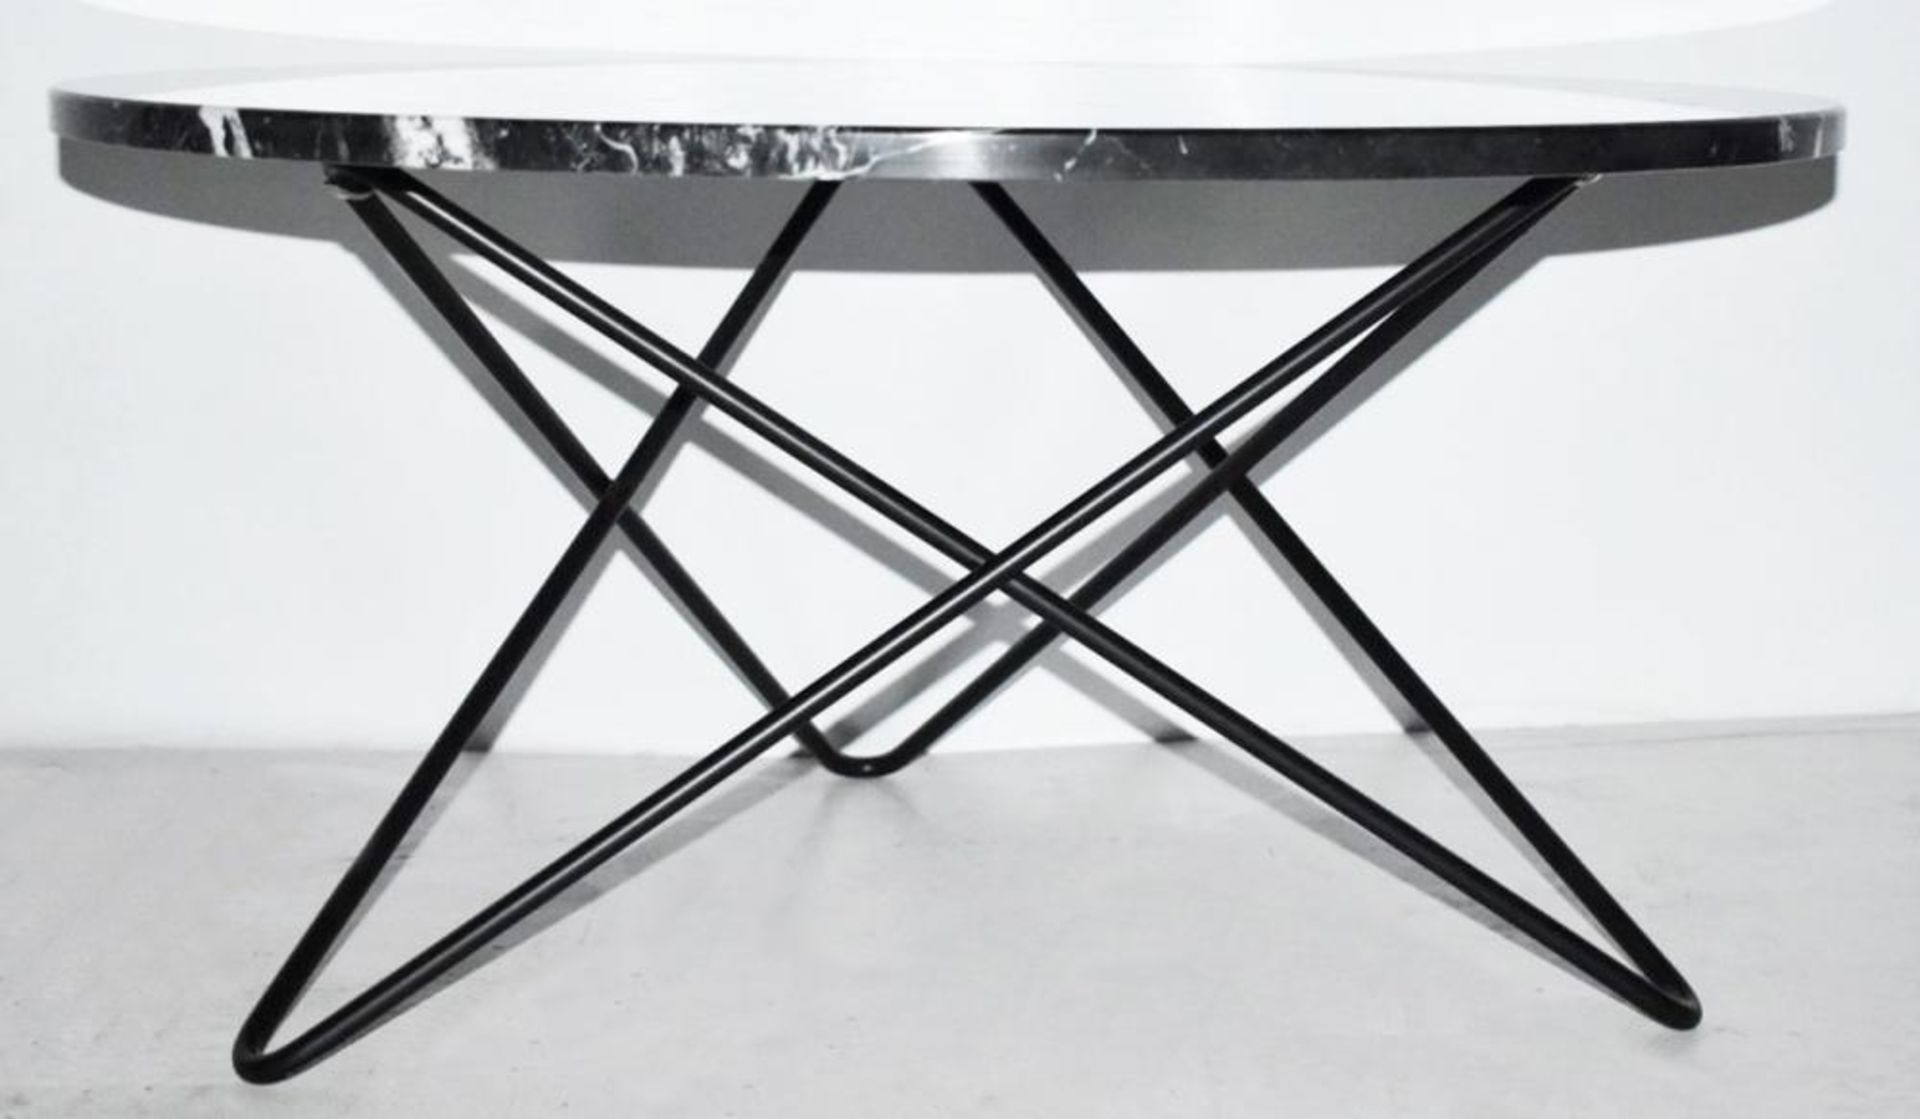 1 x OX DENMARQ 'O' 80cm Black Marquina Marble Topped Designer Table With a Black Steel Base - Recent - Image 4 of 4